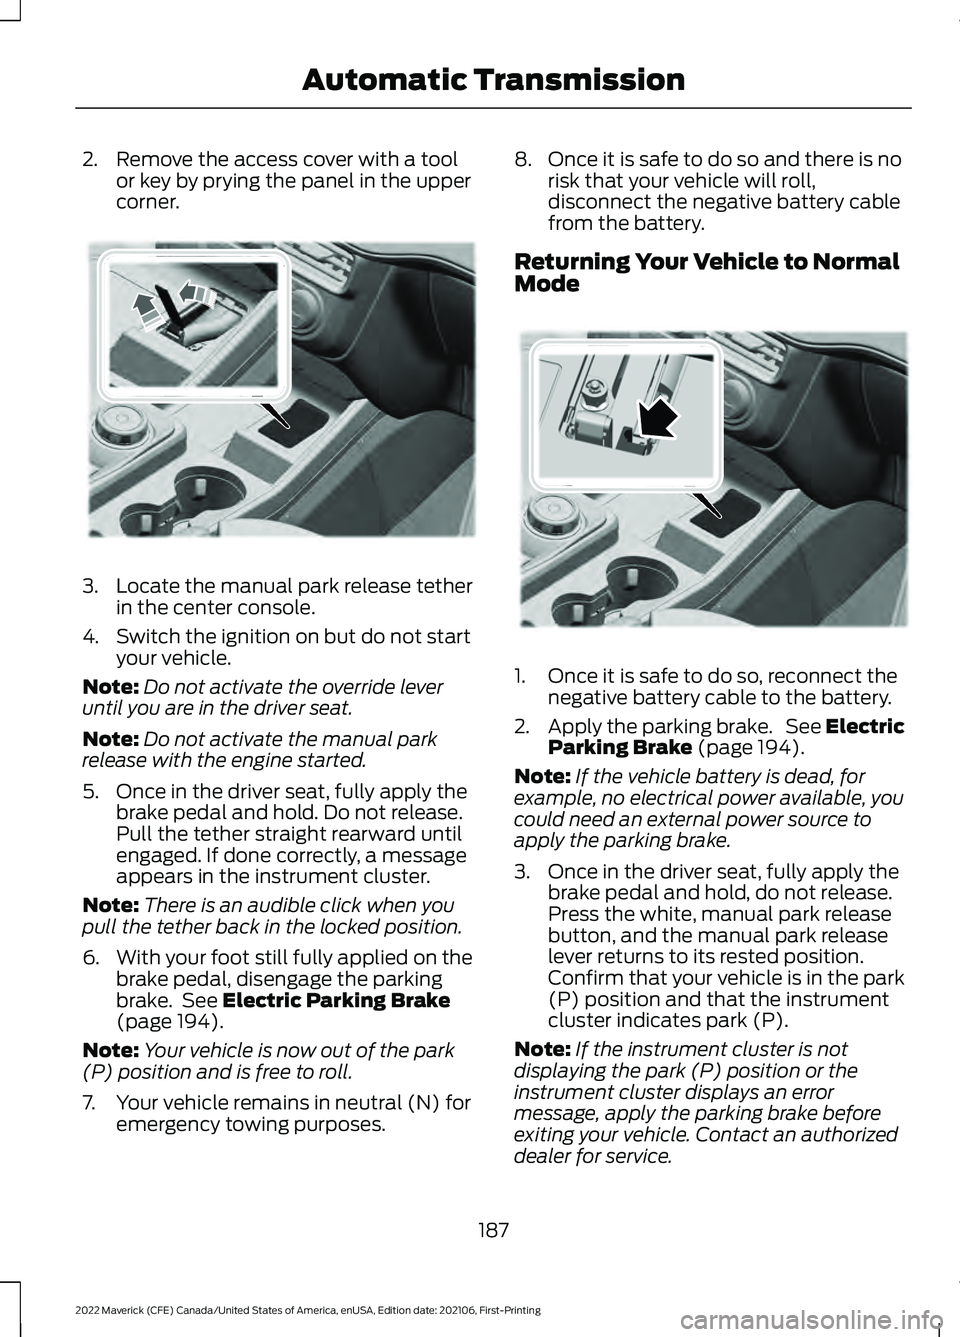 FORD MAVERICK 2022  Owners Manual 2. Remove the access cover with a tool
or key by prying the panel in the upper
corner. 3.
Locate the manual park release tether
in the center console.
4. Switch the ignition on but do not start your v